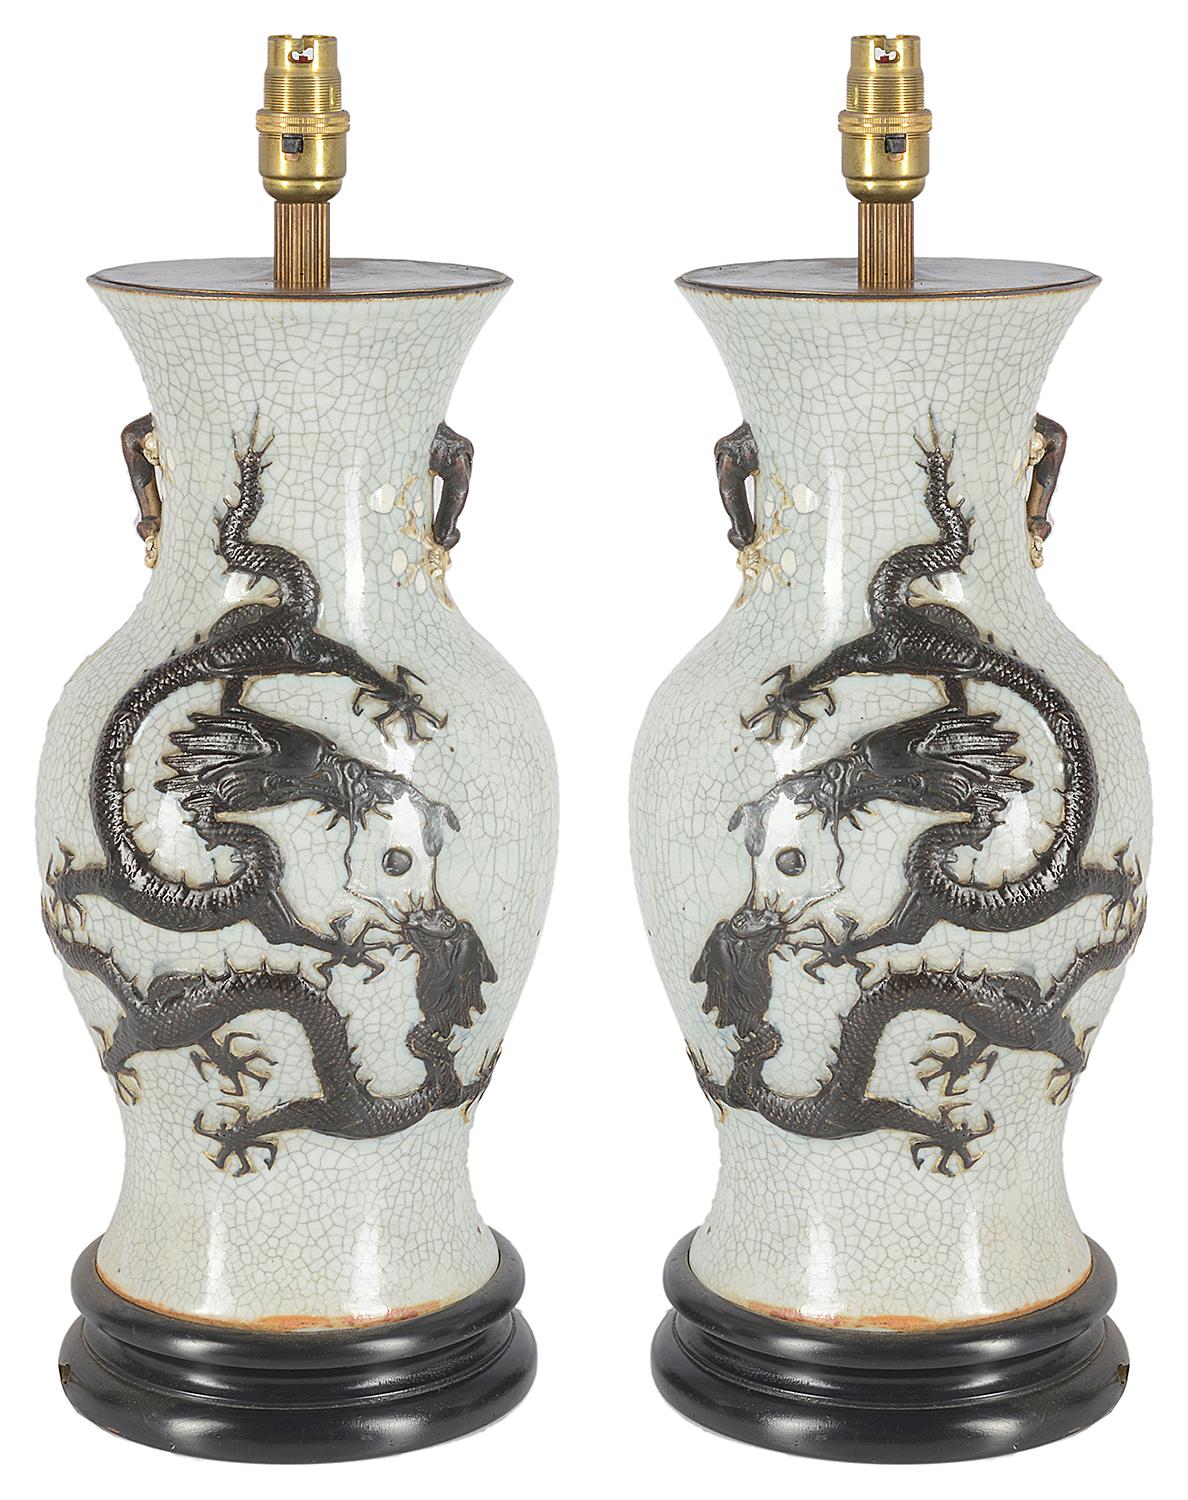 Pair of late 19th century Chinese crackleware vases or lamps. Each having a white ground with a mythical dragon in releaf.